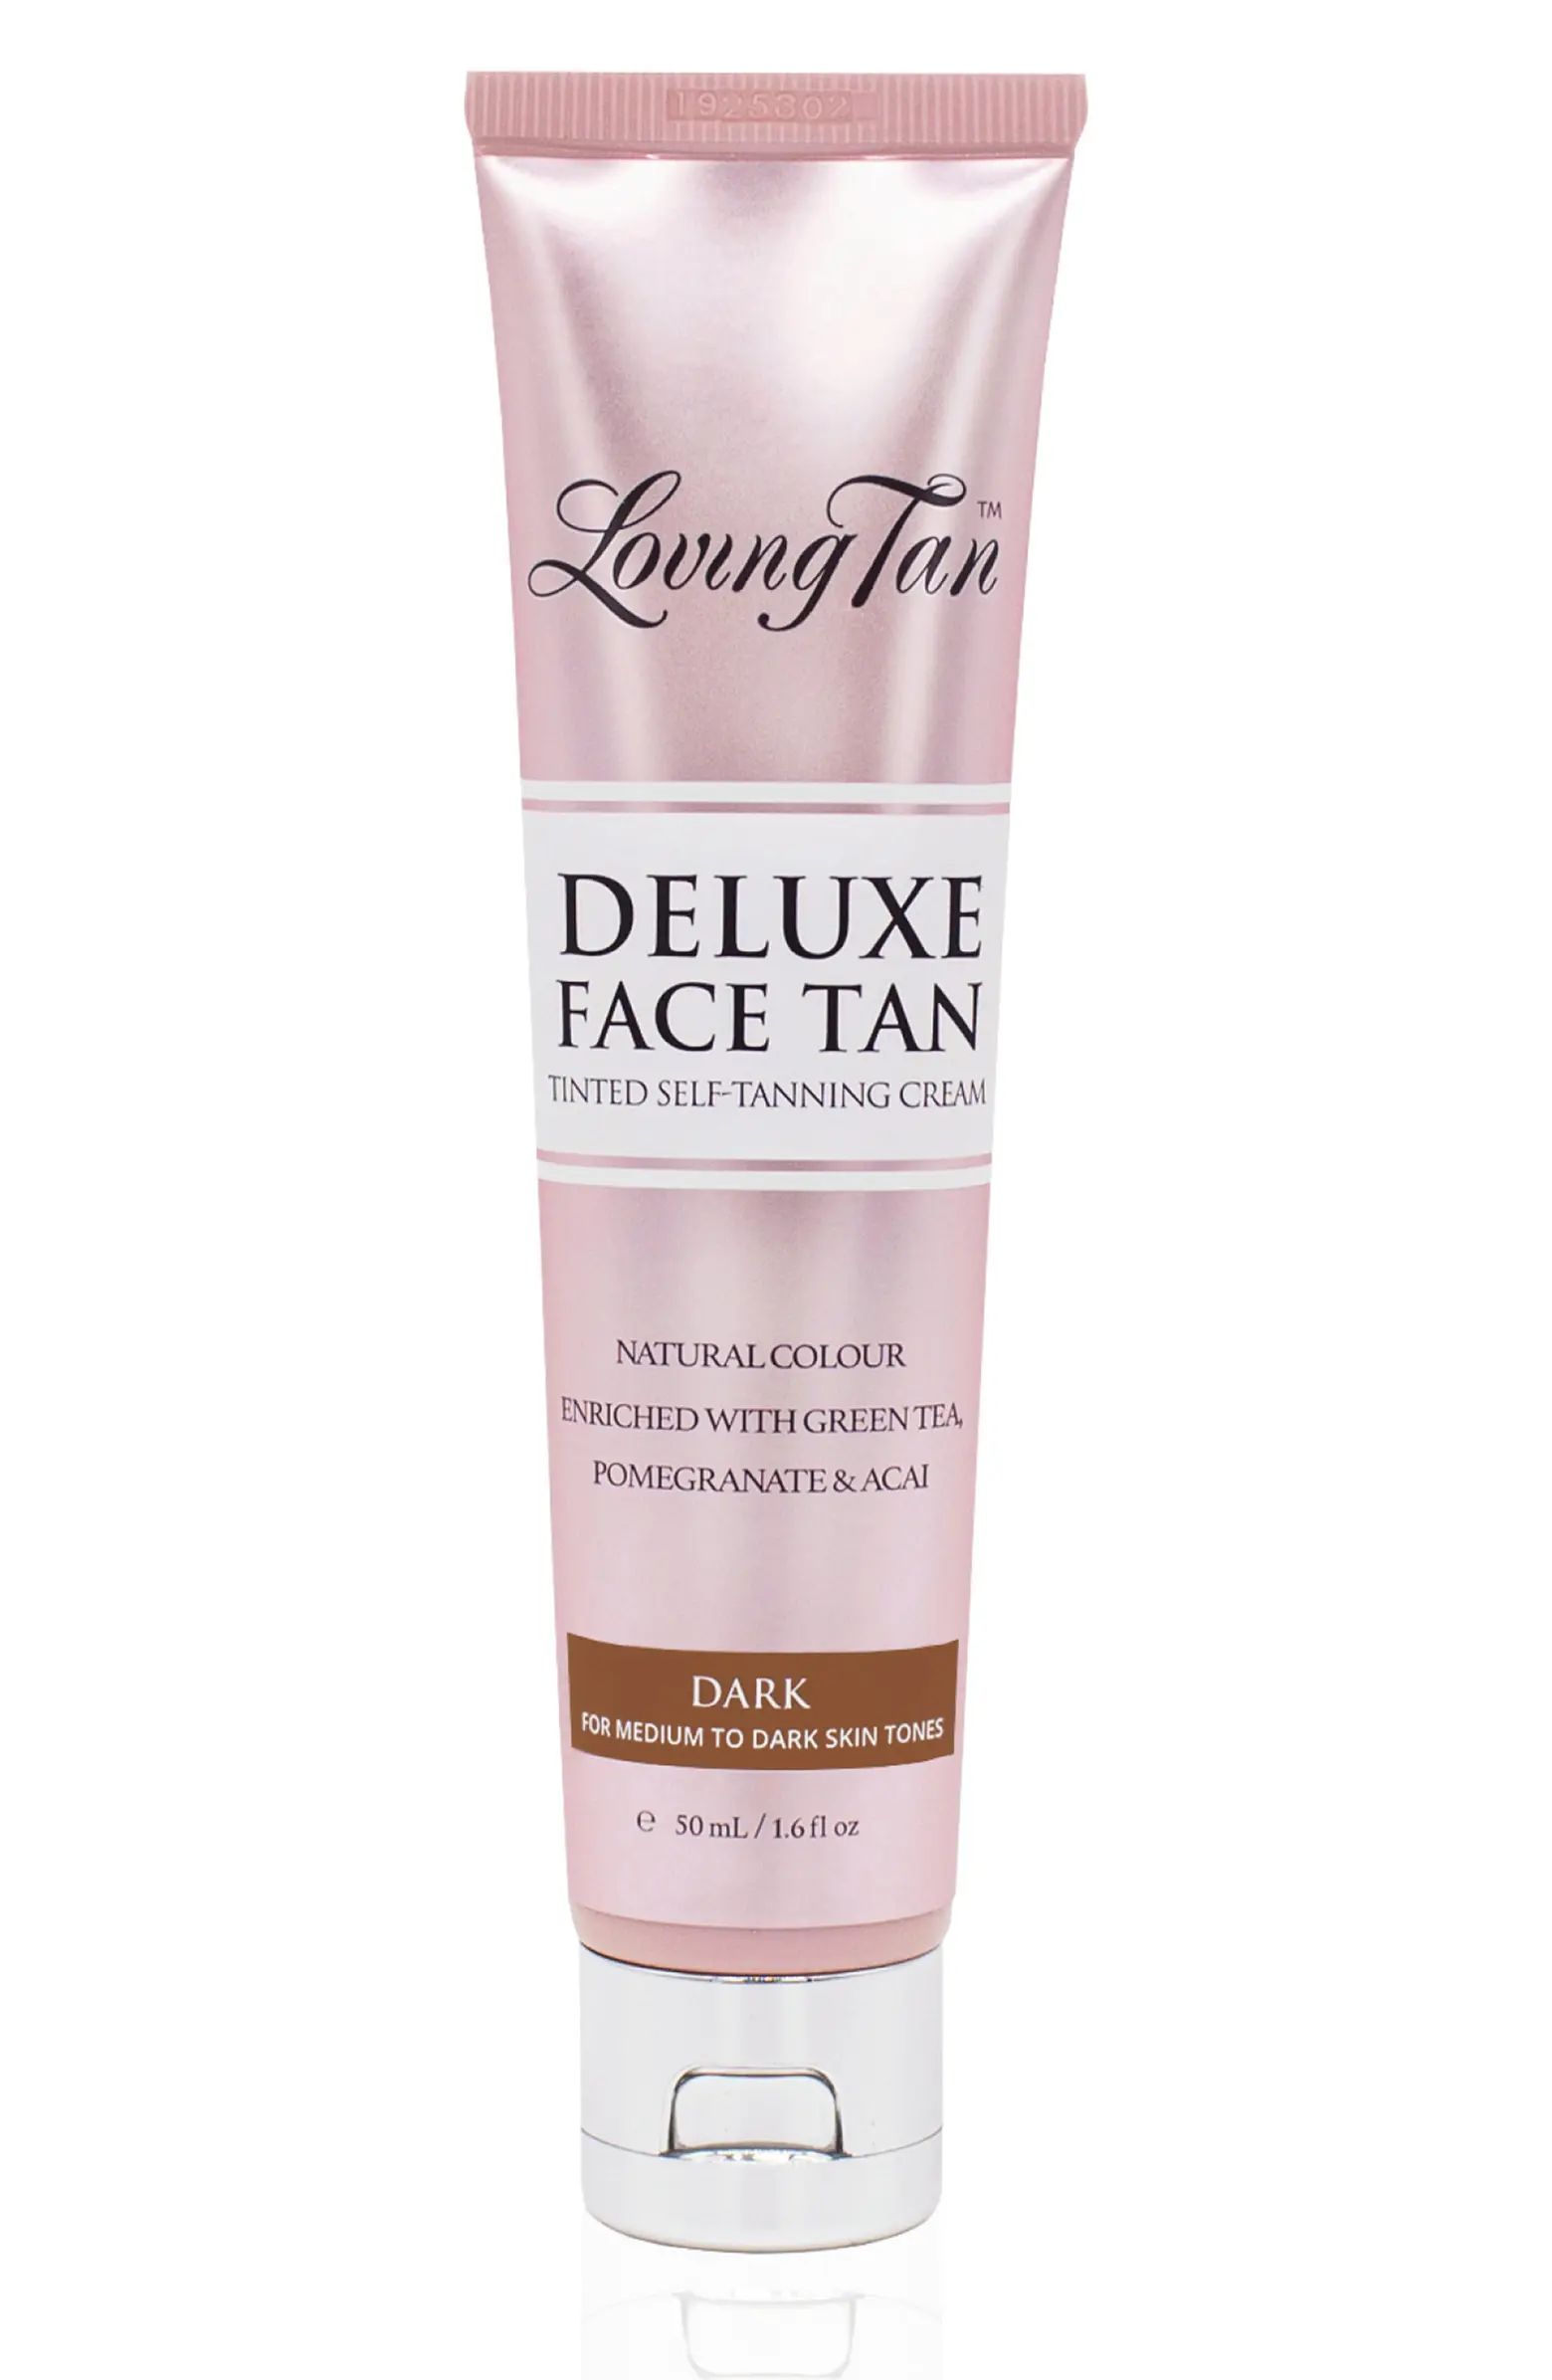 Deluxe Face Tan Tinted Self-Tanning Cream | Nordstrom